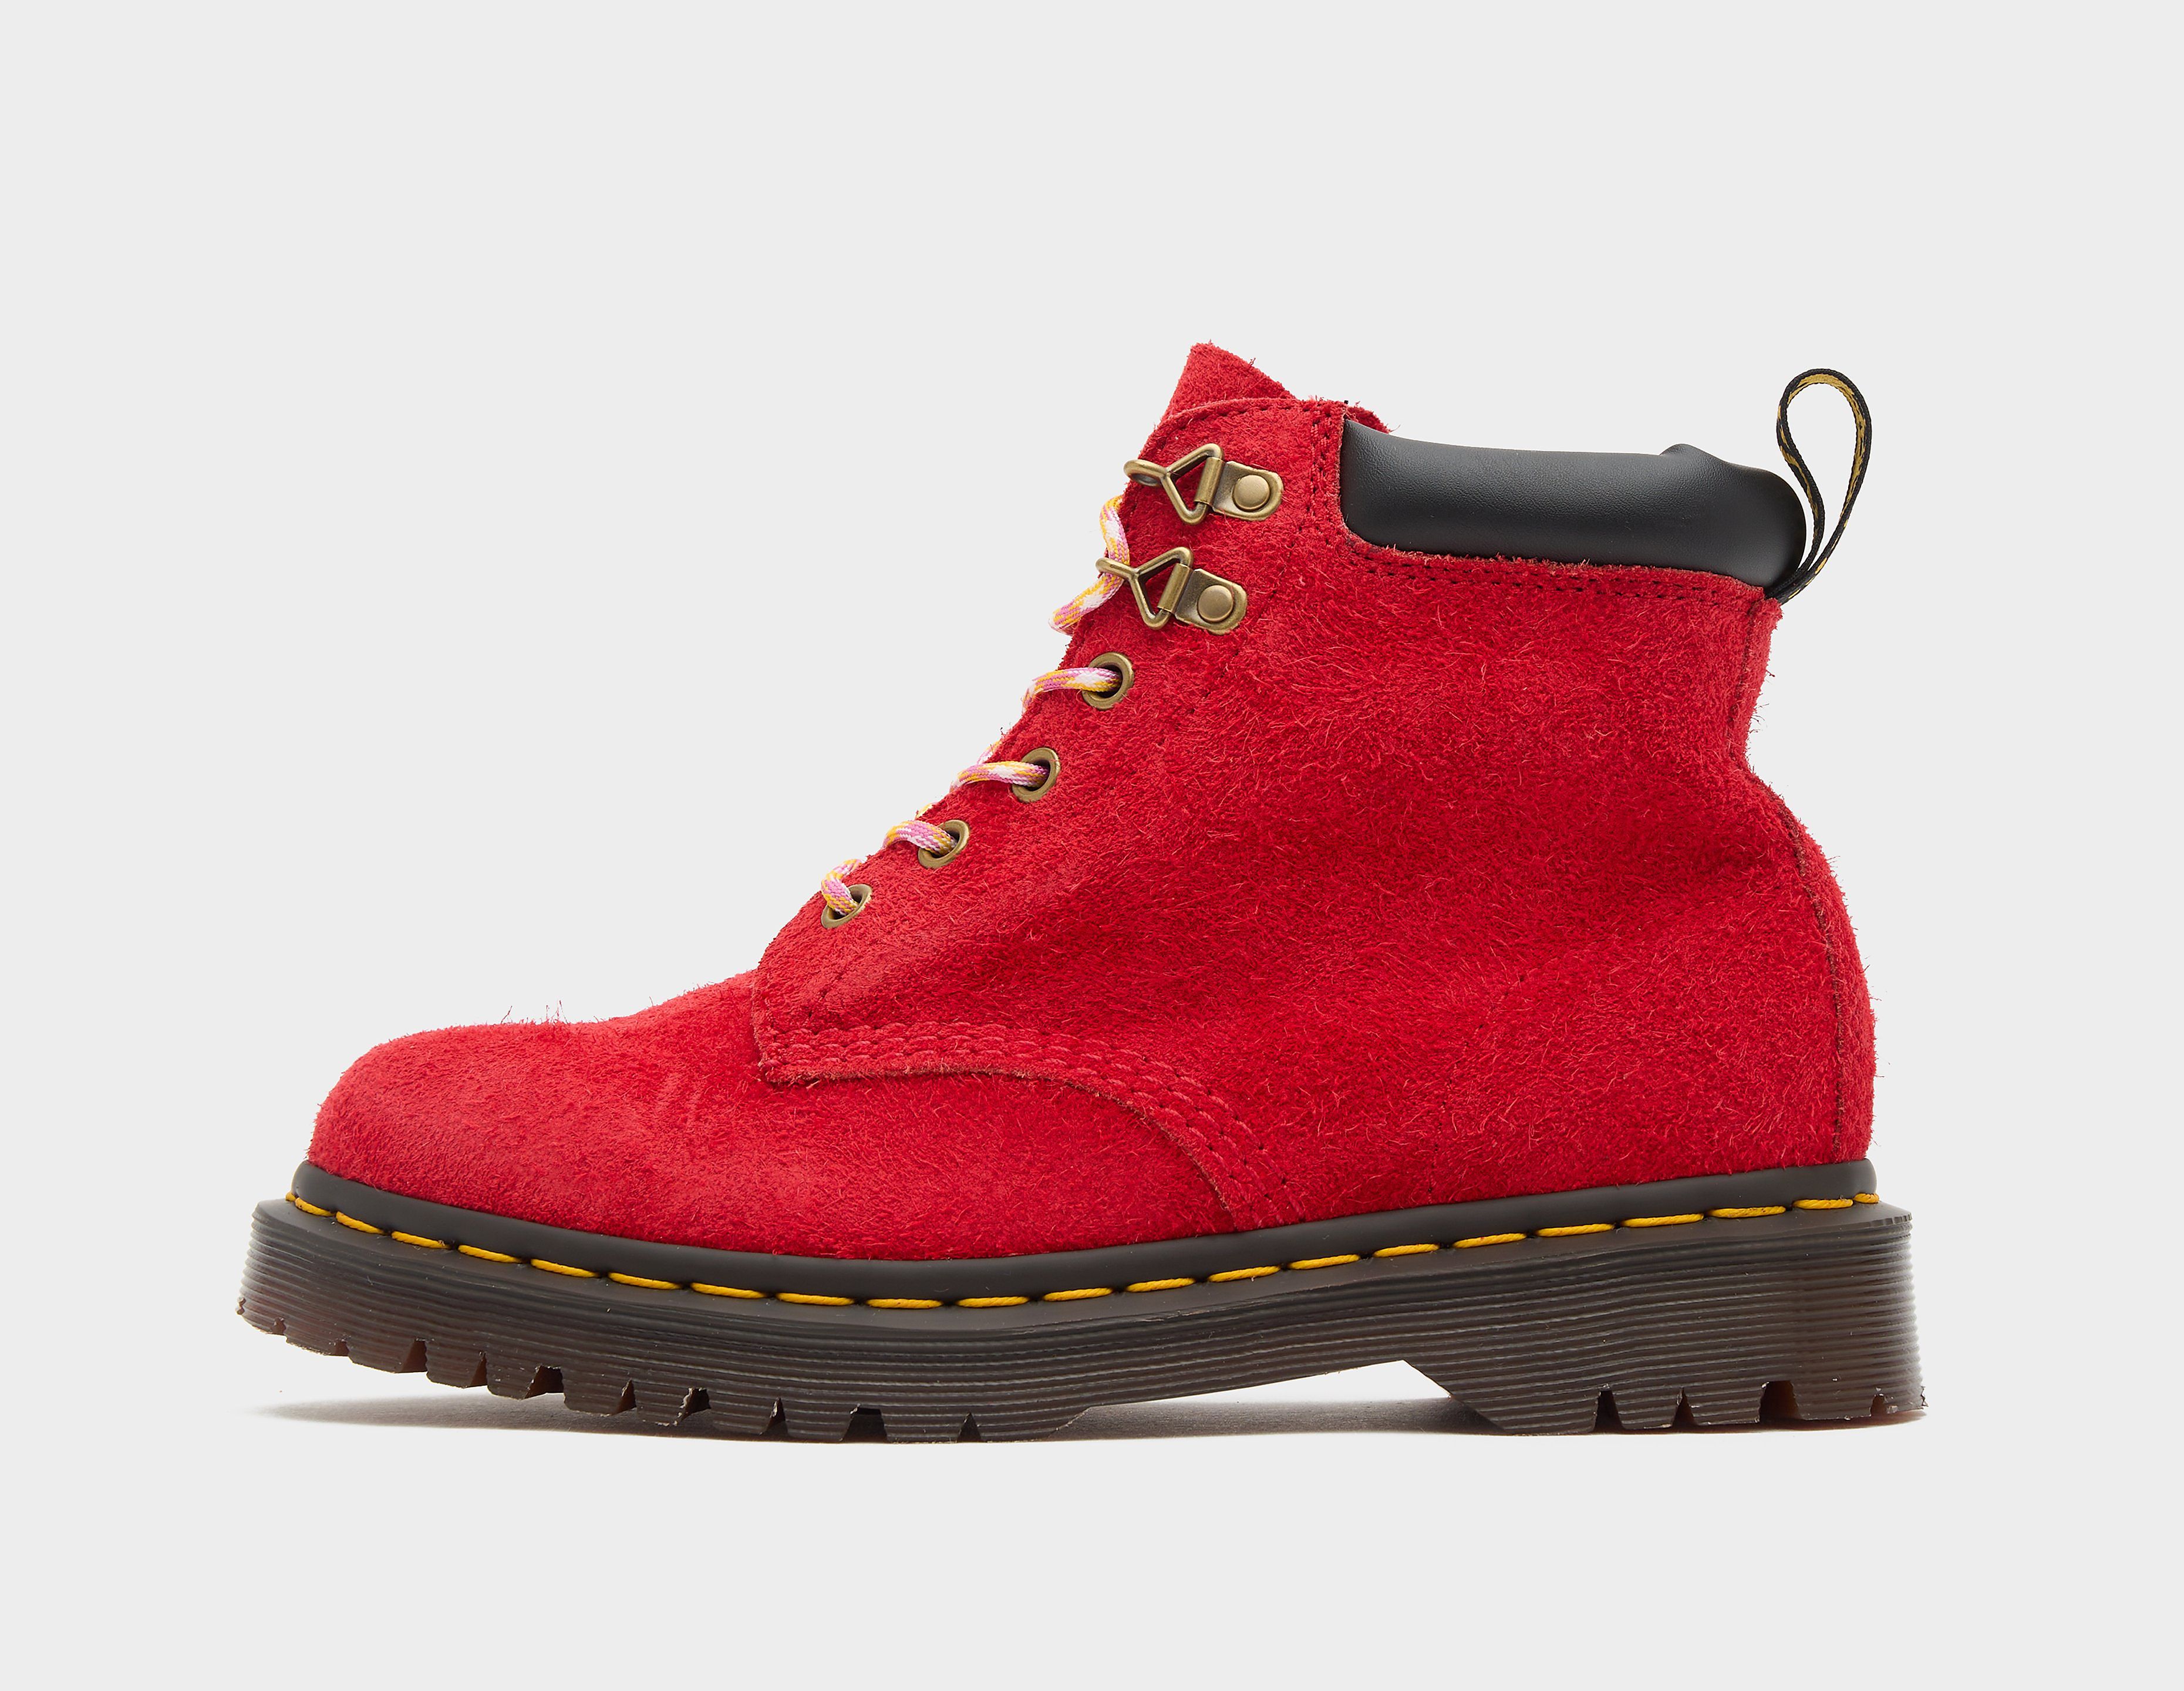 Dr. Martens 939 Suede Boot Women's, Red